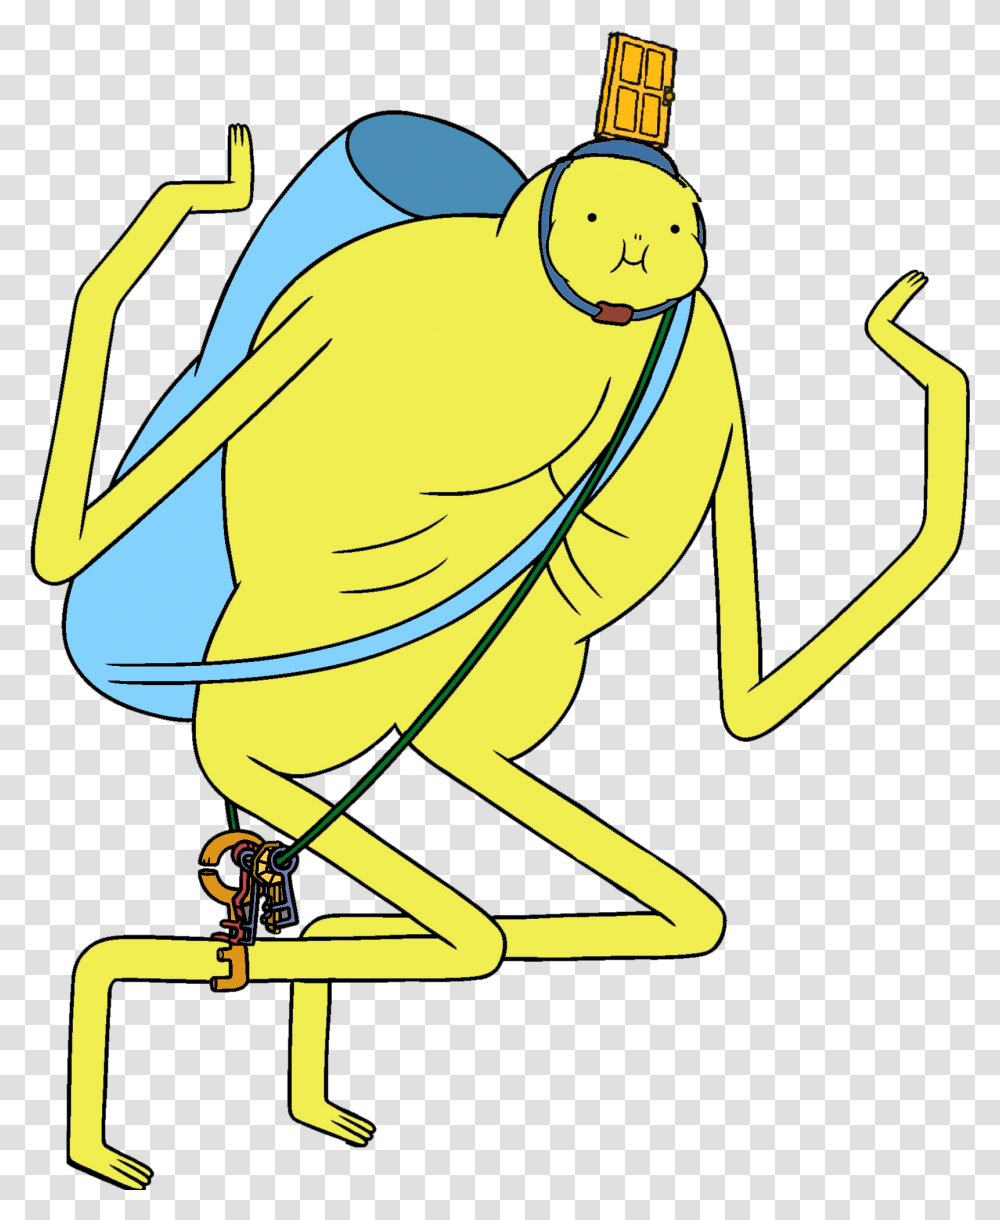 Adventure Time Come Along With Me Full Episode Adventure Time Keyper, Animal, Insect, Invertebrate, Grasshopper Transparent Png